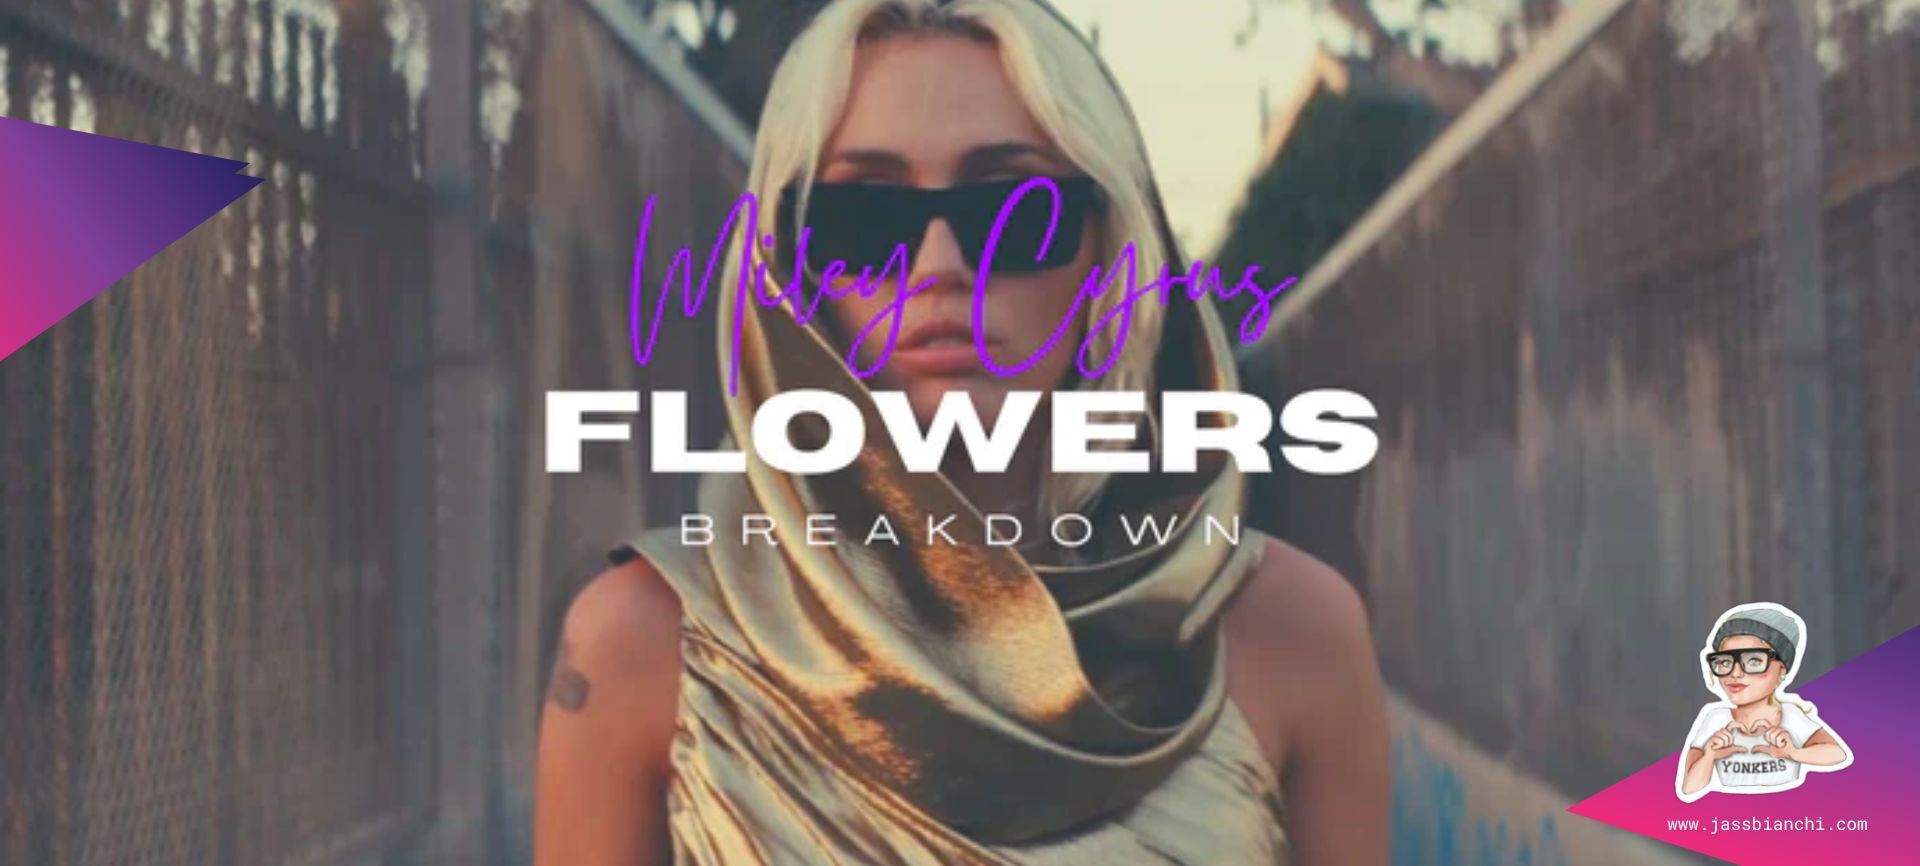 "Why 'Flowers by Miley Cyrus is the Perfect Song for Introverts"